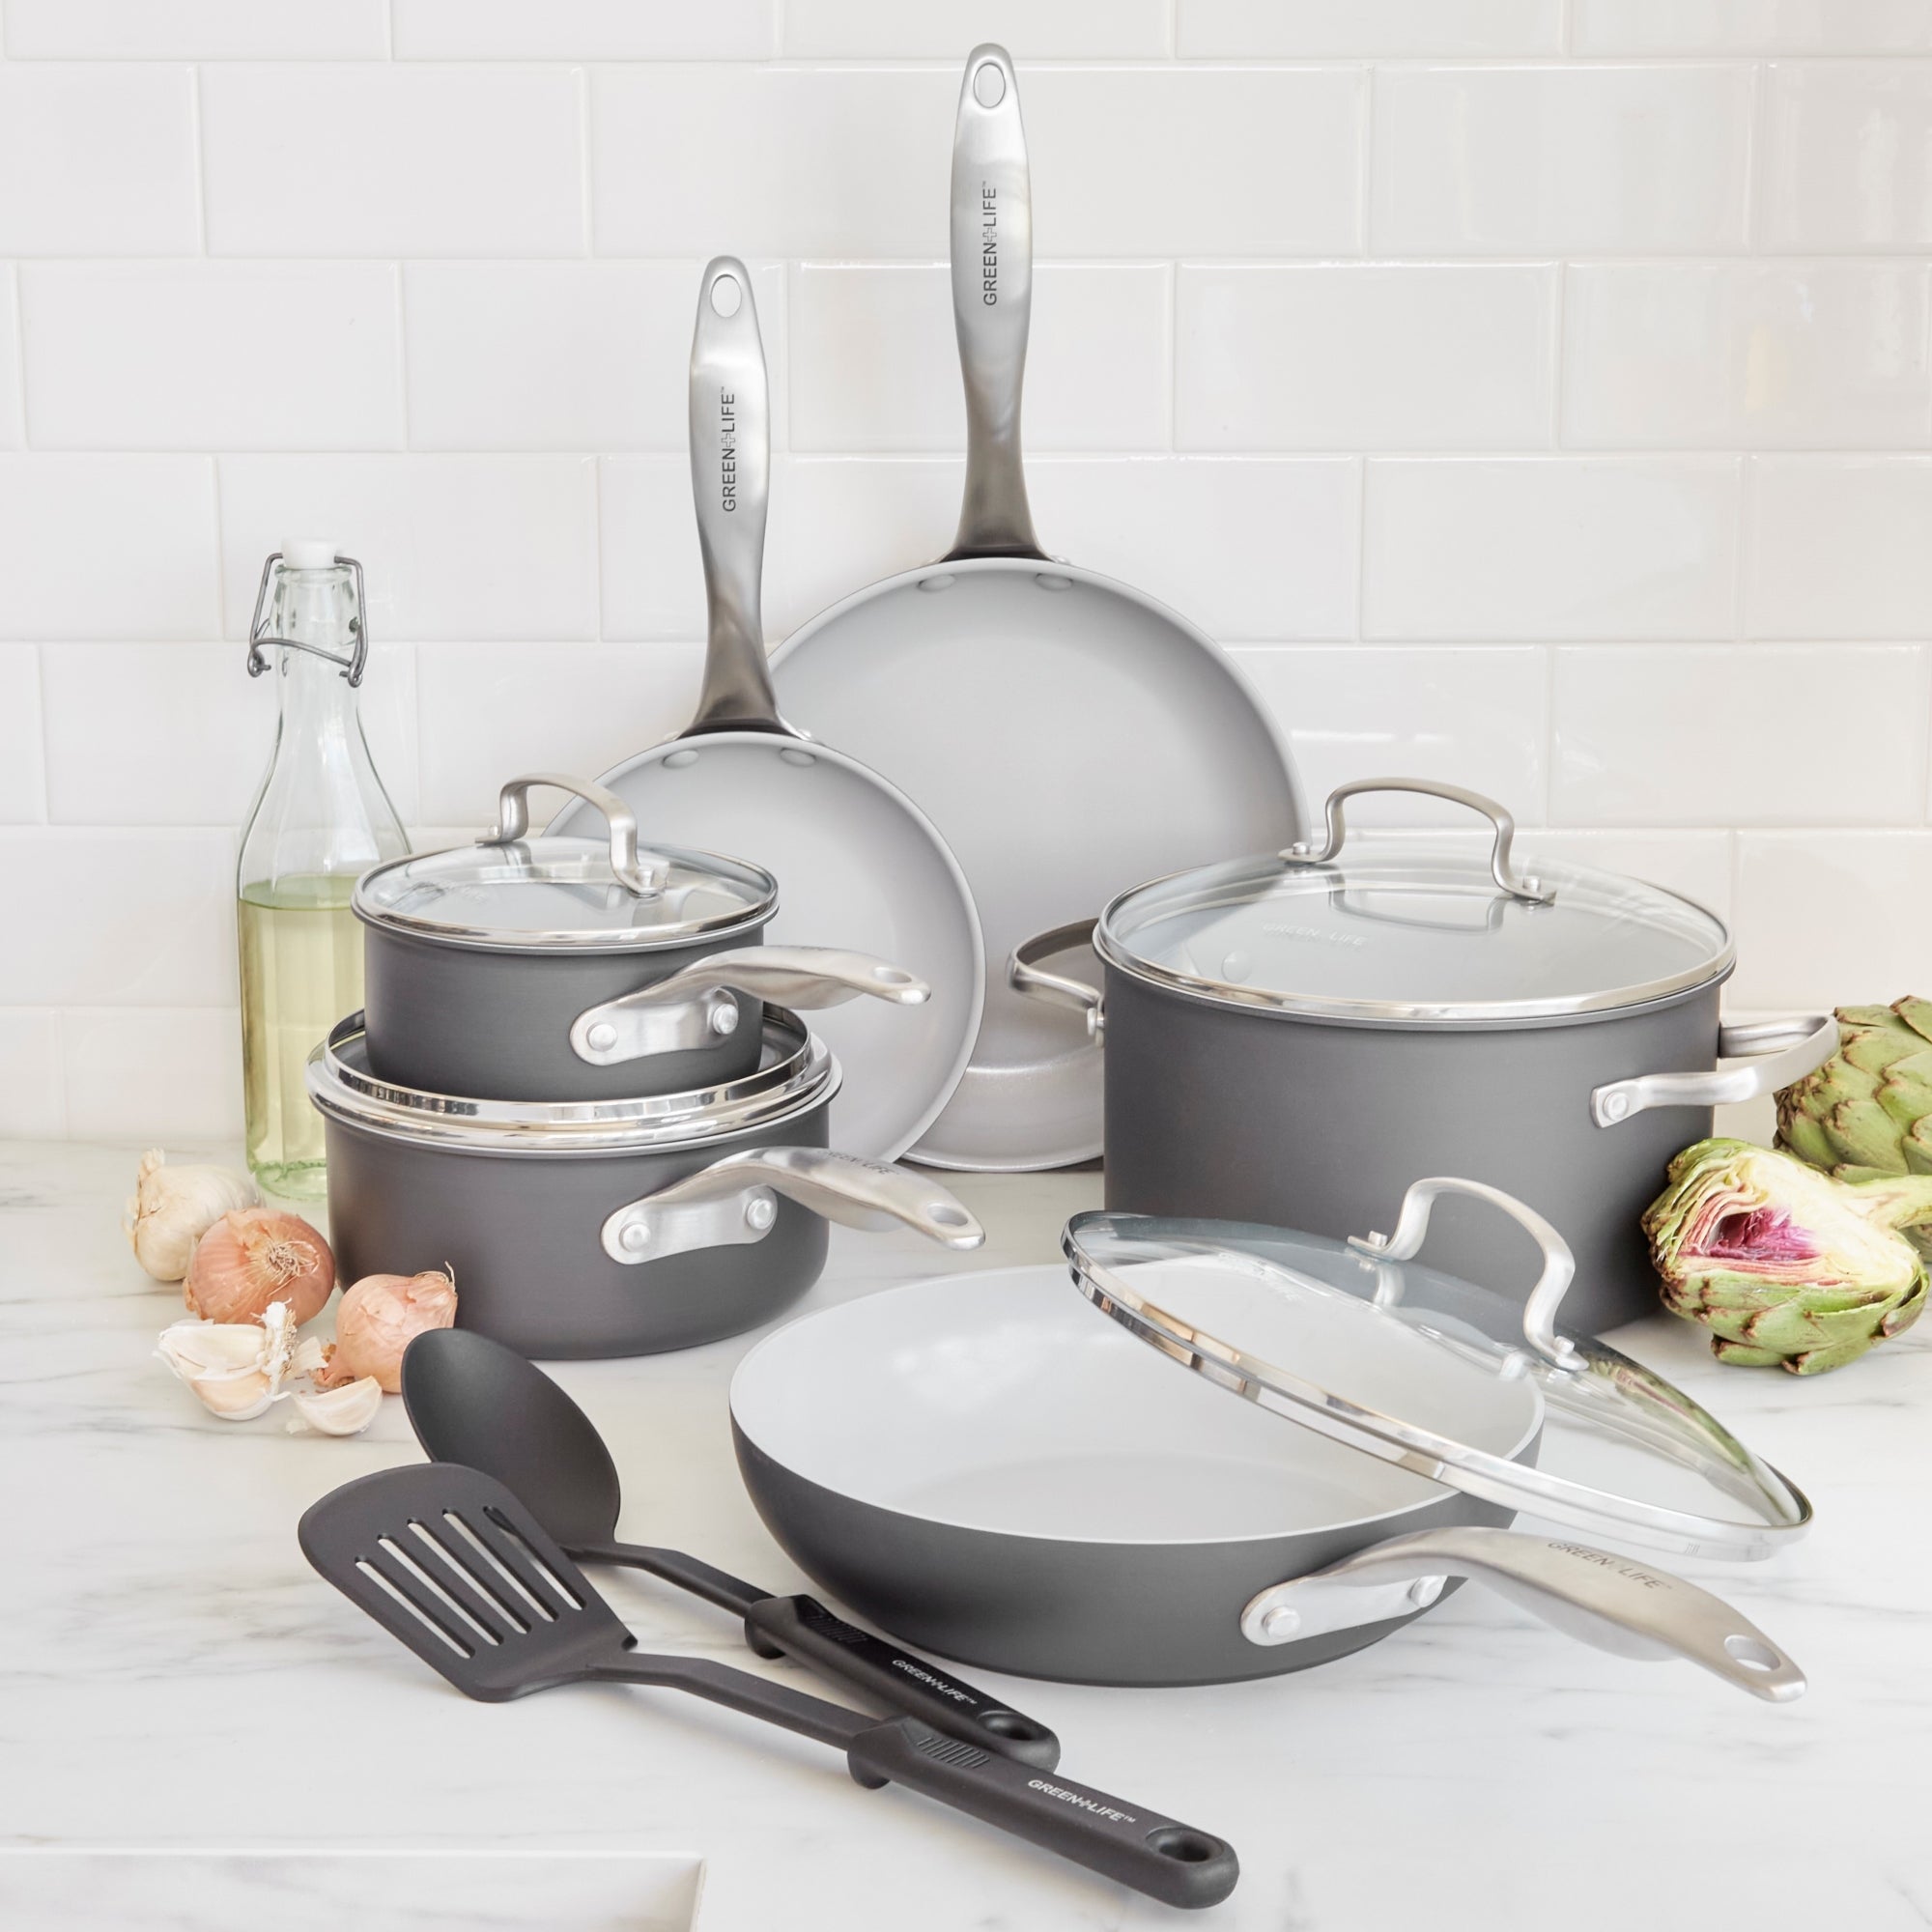 12 Piece Cookware Set With Lids